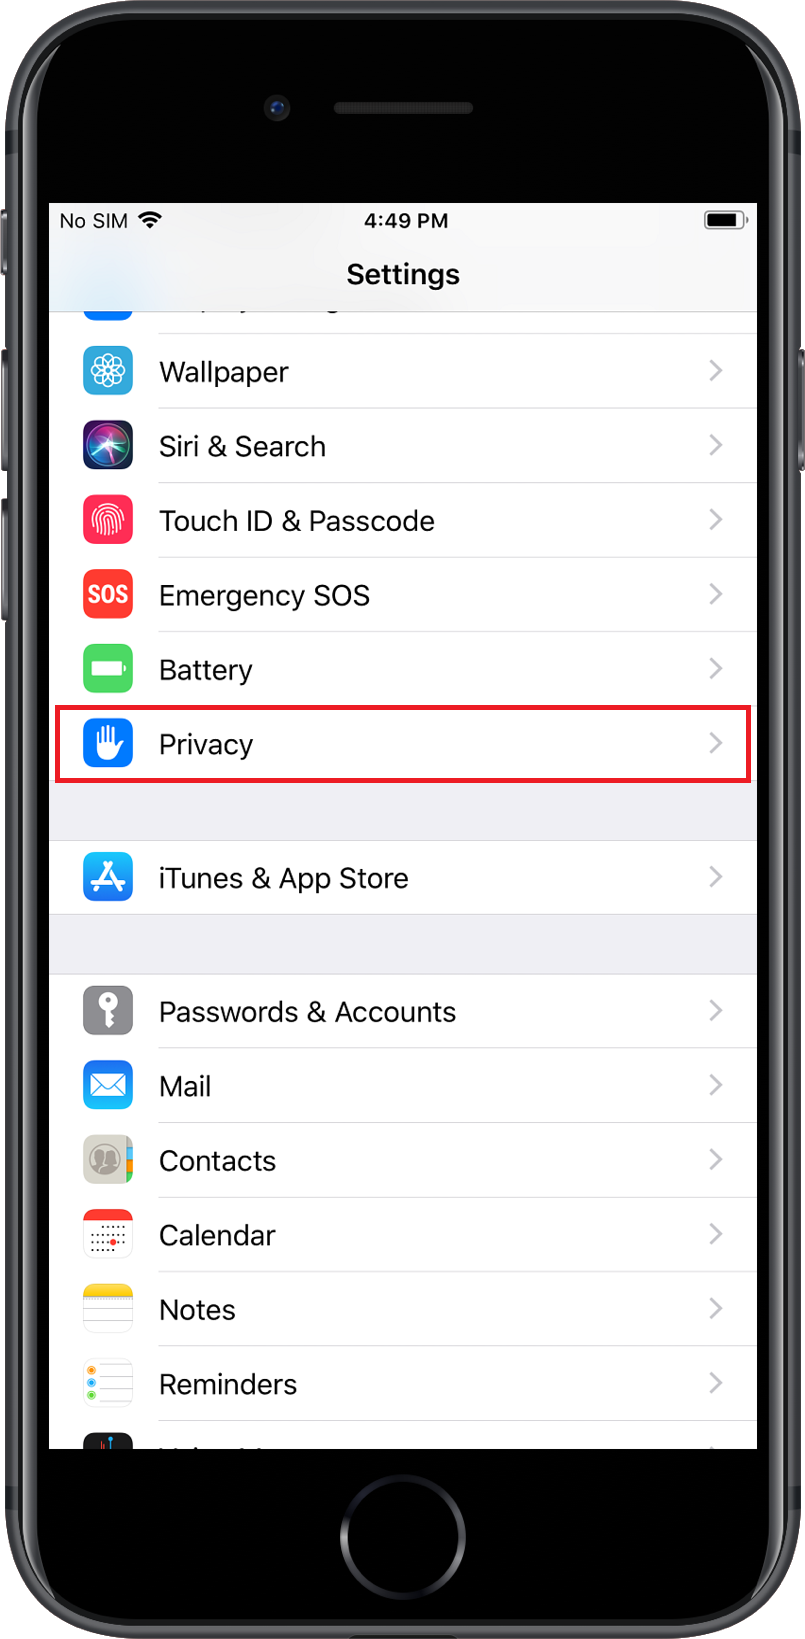 Navigating to Privacy under iPhone Settings to enable Geo-tracking